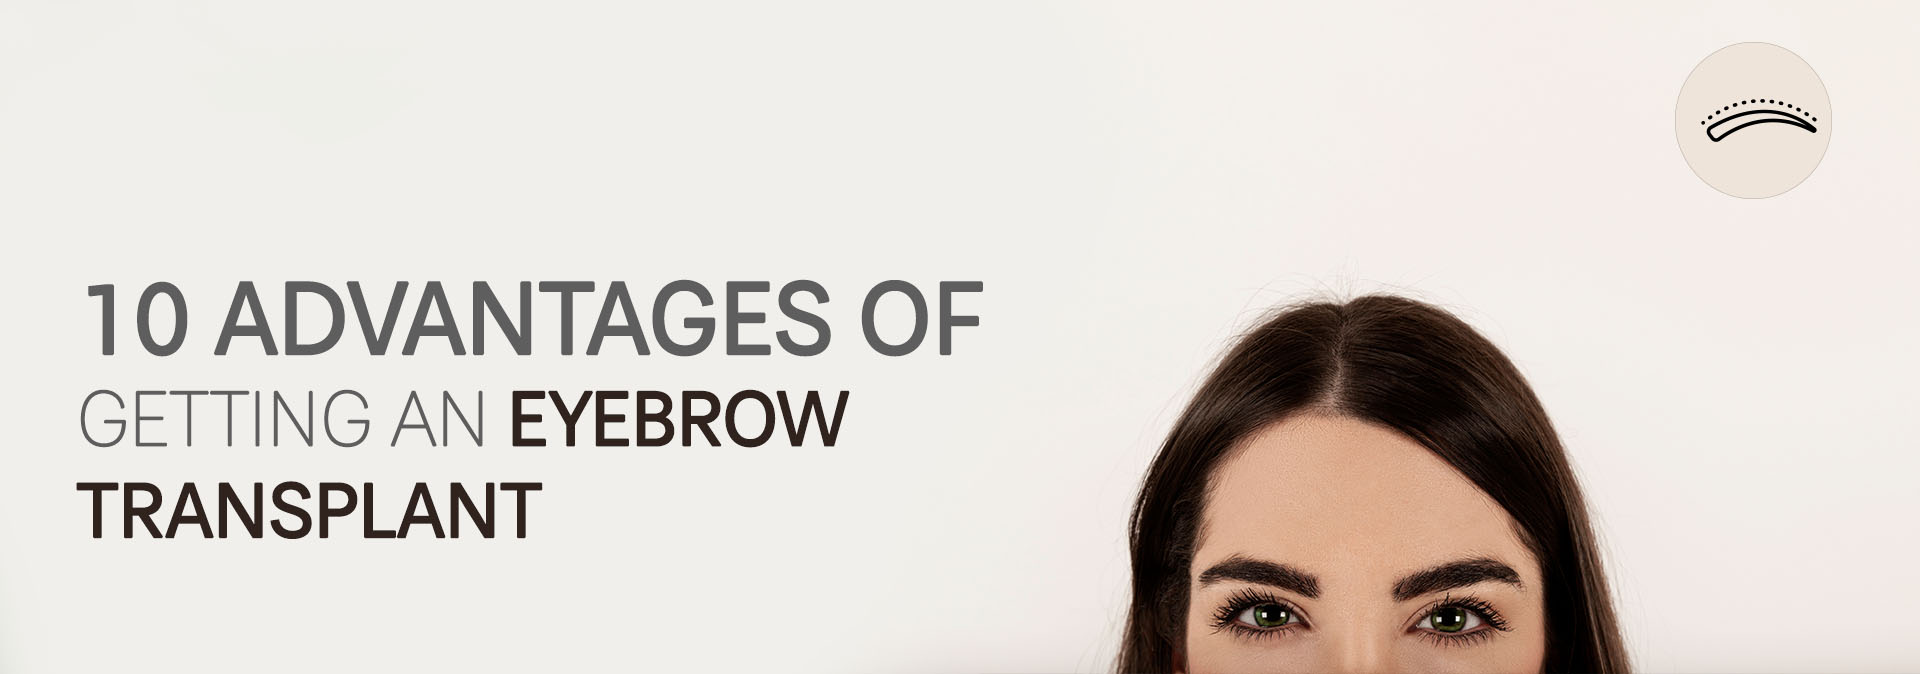 10 advantages of getting an eyebrow transplant